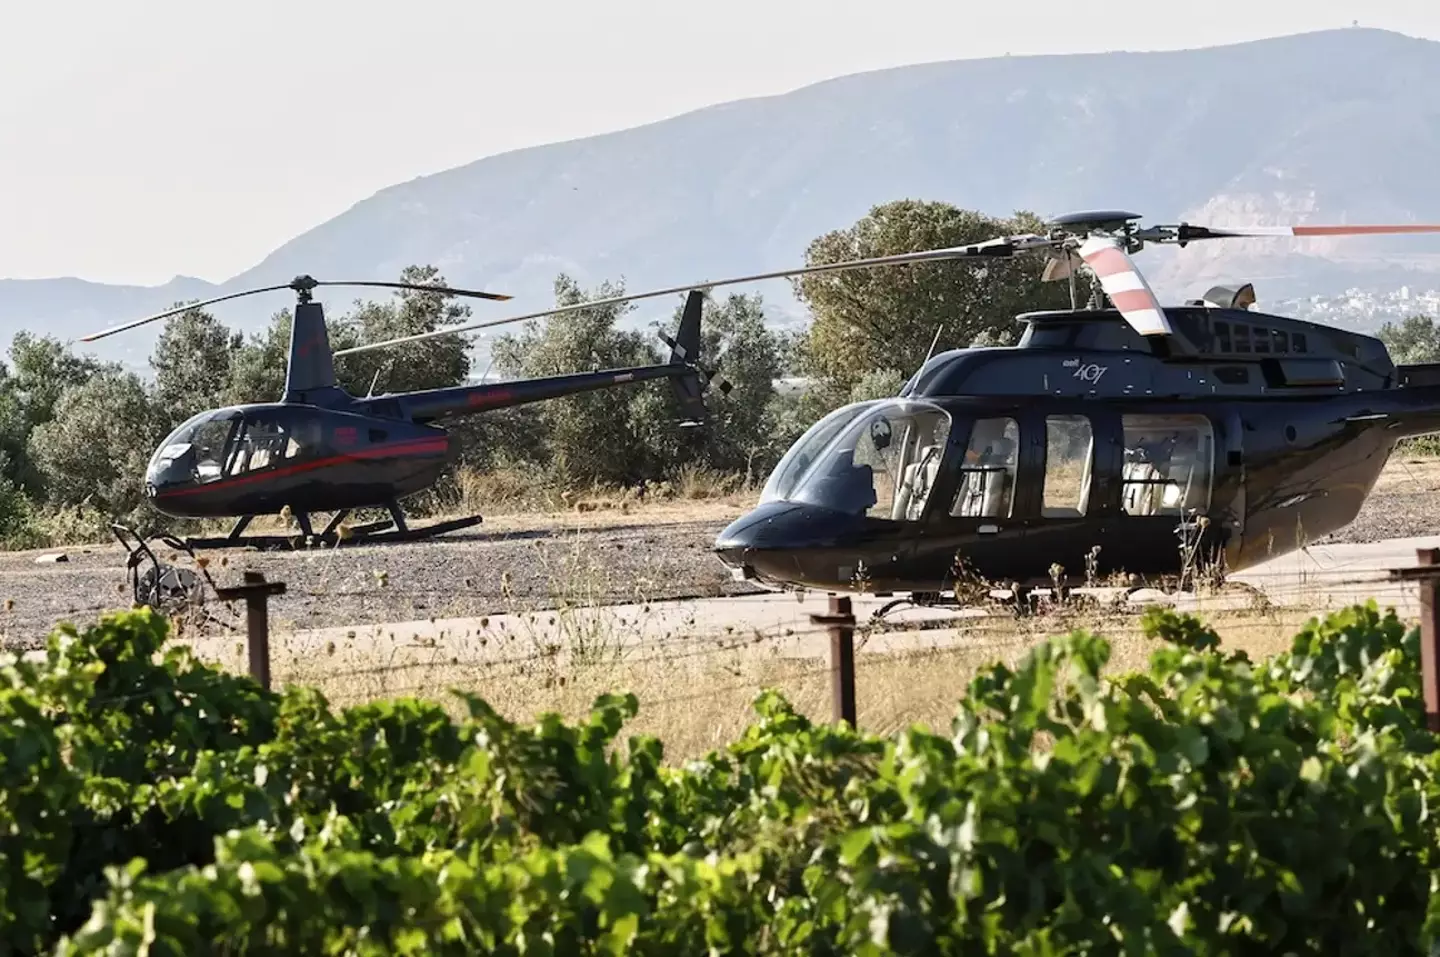 The Bell 407 helicopter that Fenton and his friends had been transported in was piloted by Christos Fragkopanagos.